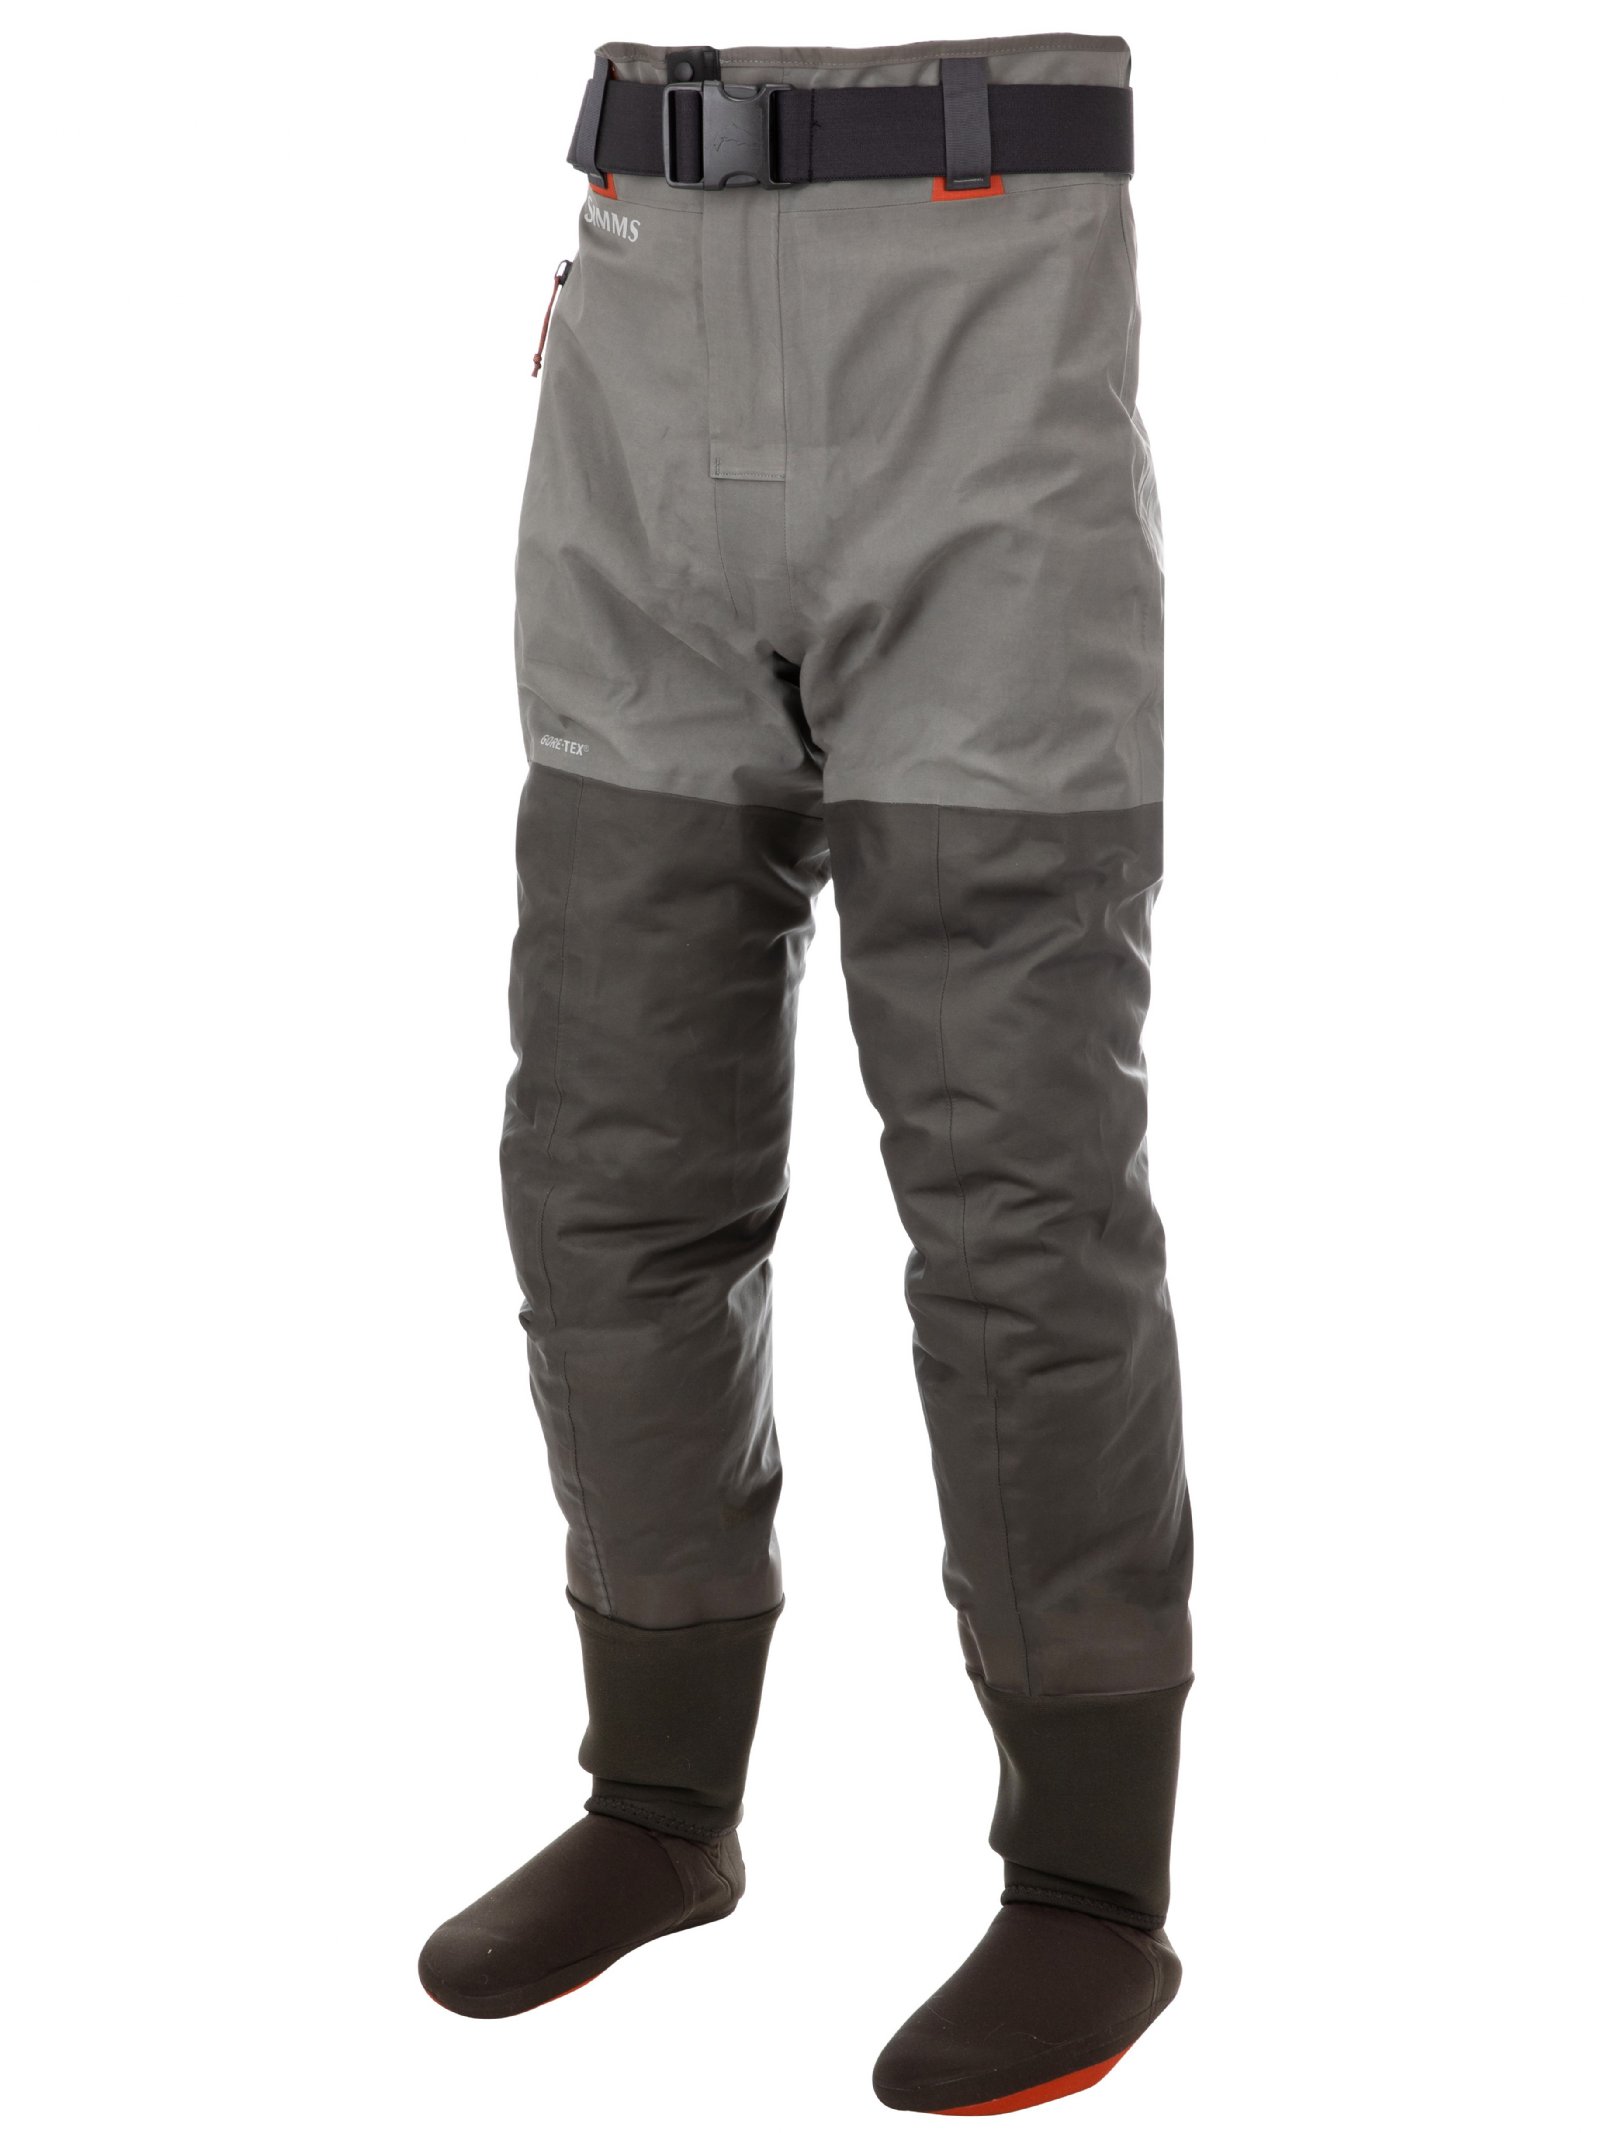 Simms M's G3 Guide Wading Pant - XL